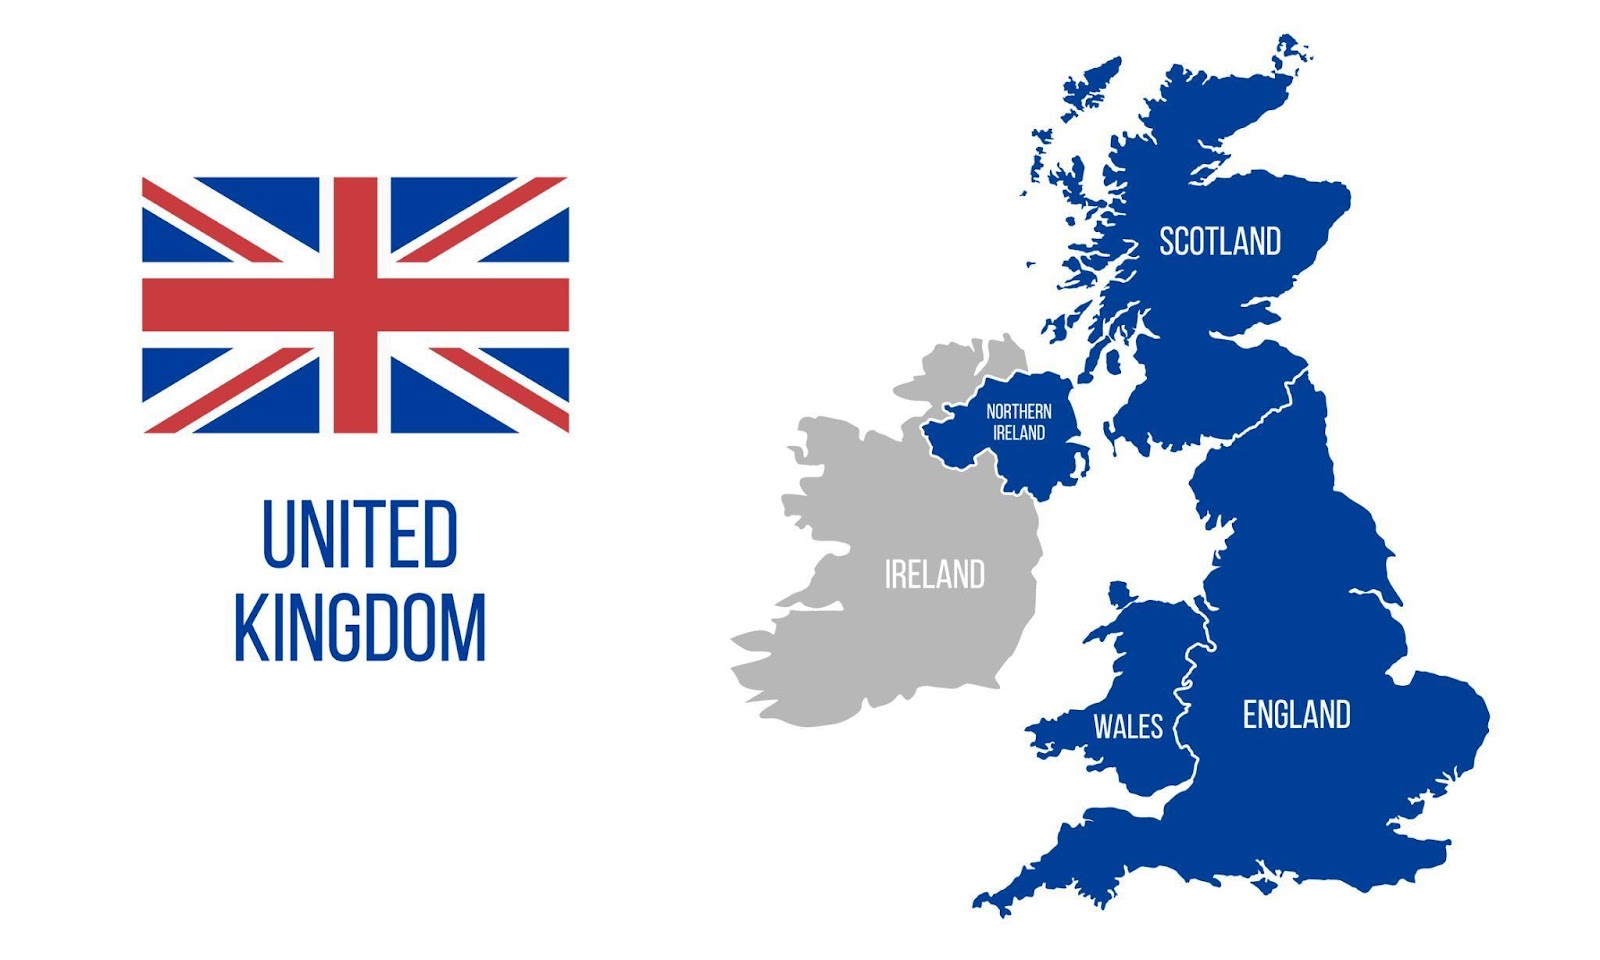 Note that the United Kingdom (UK) and Great Britain, although very similar, are not synonymous in this legislative context